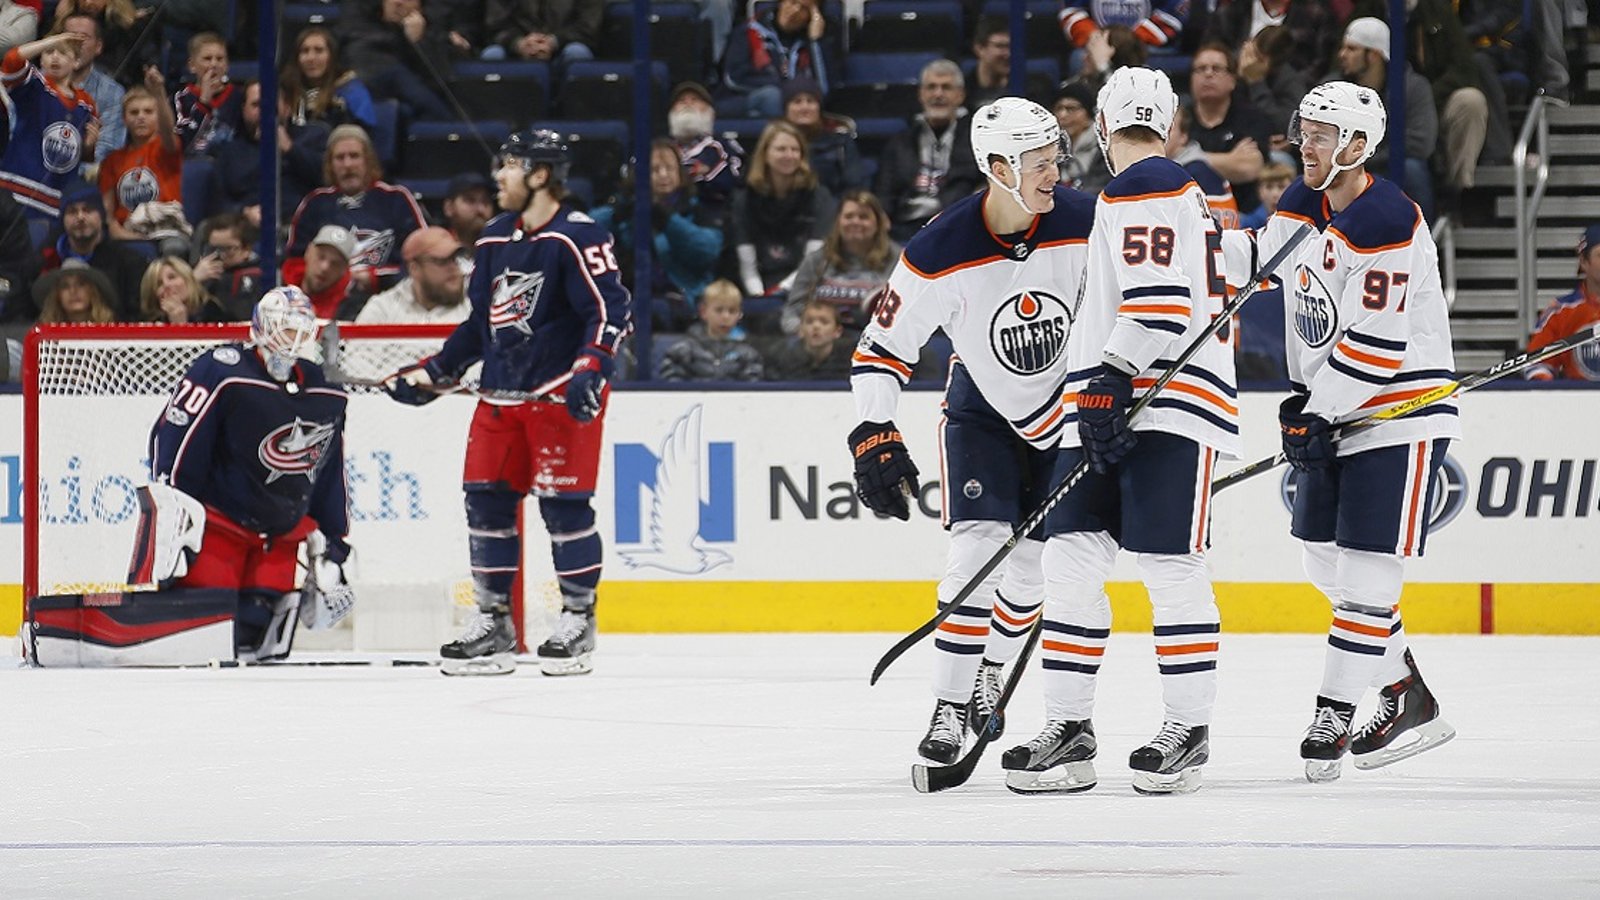 Rumor: Oilers have “quietly asked” not to play with one of their teammates anymore.